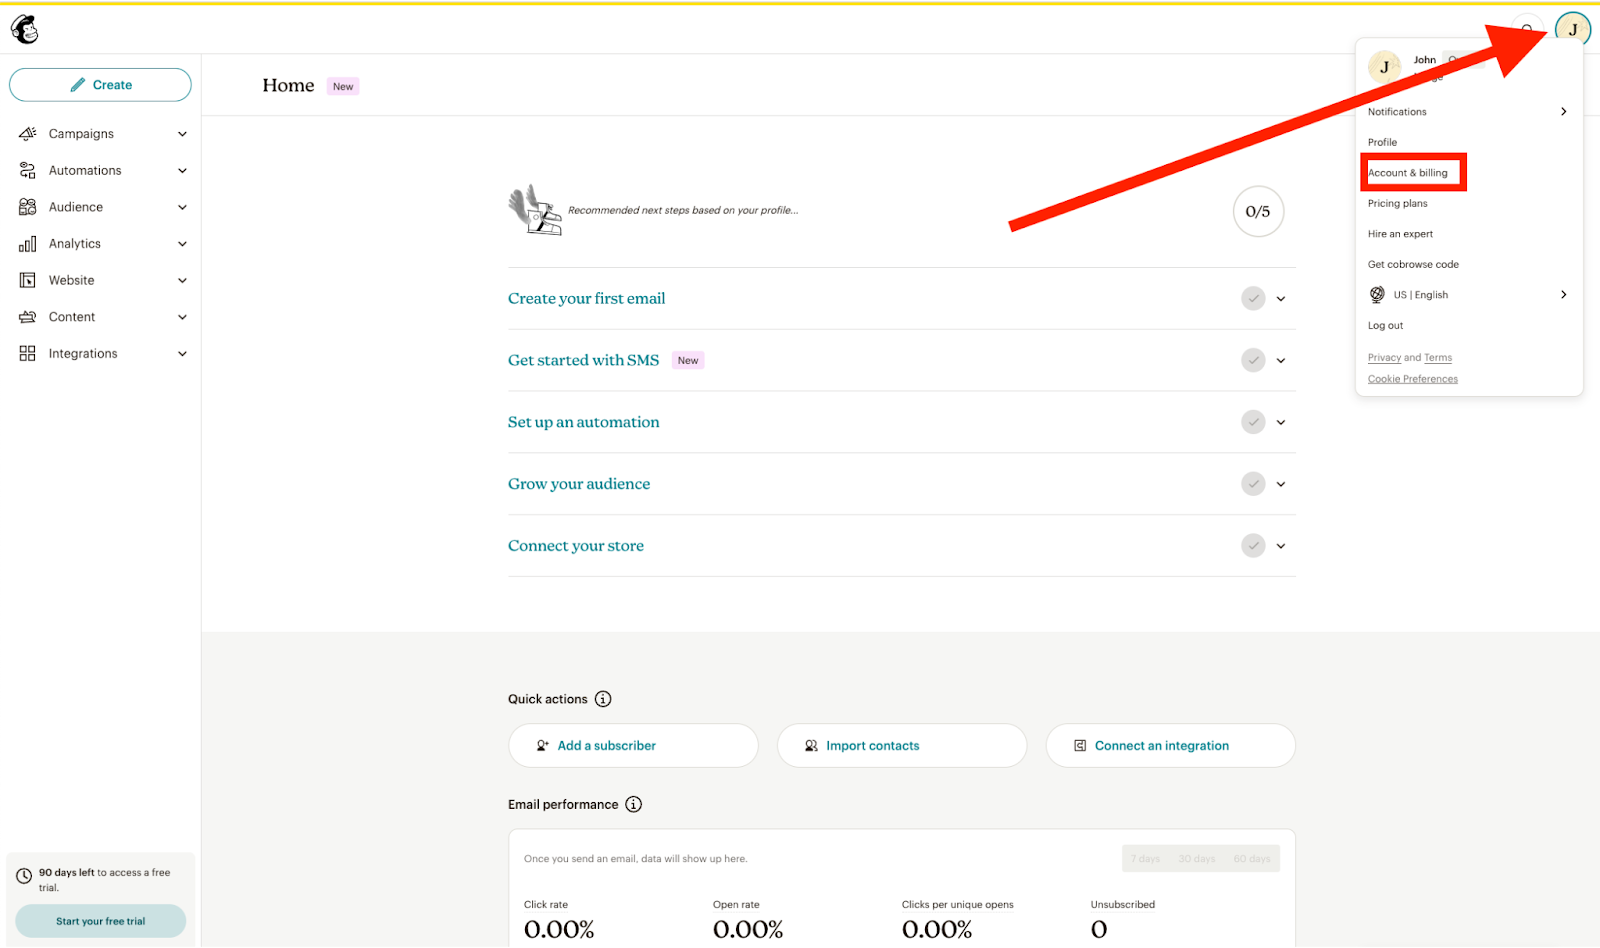 Navigating to Mailchimp's Account & billing page